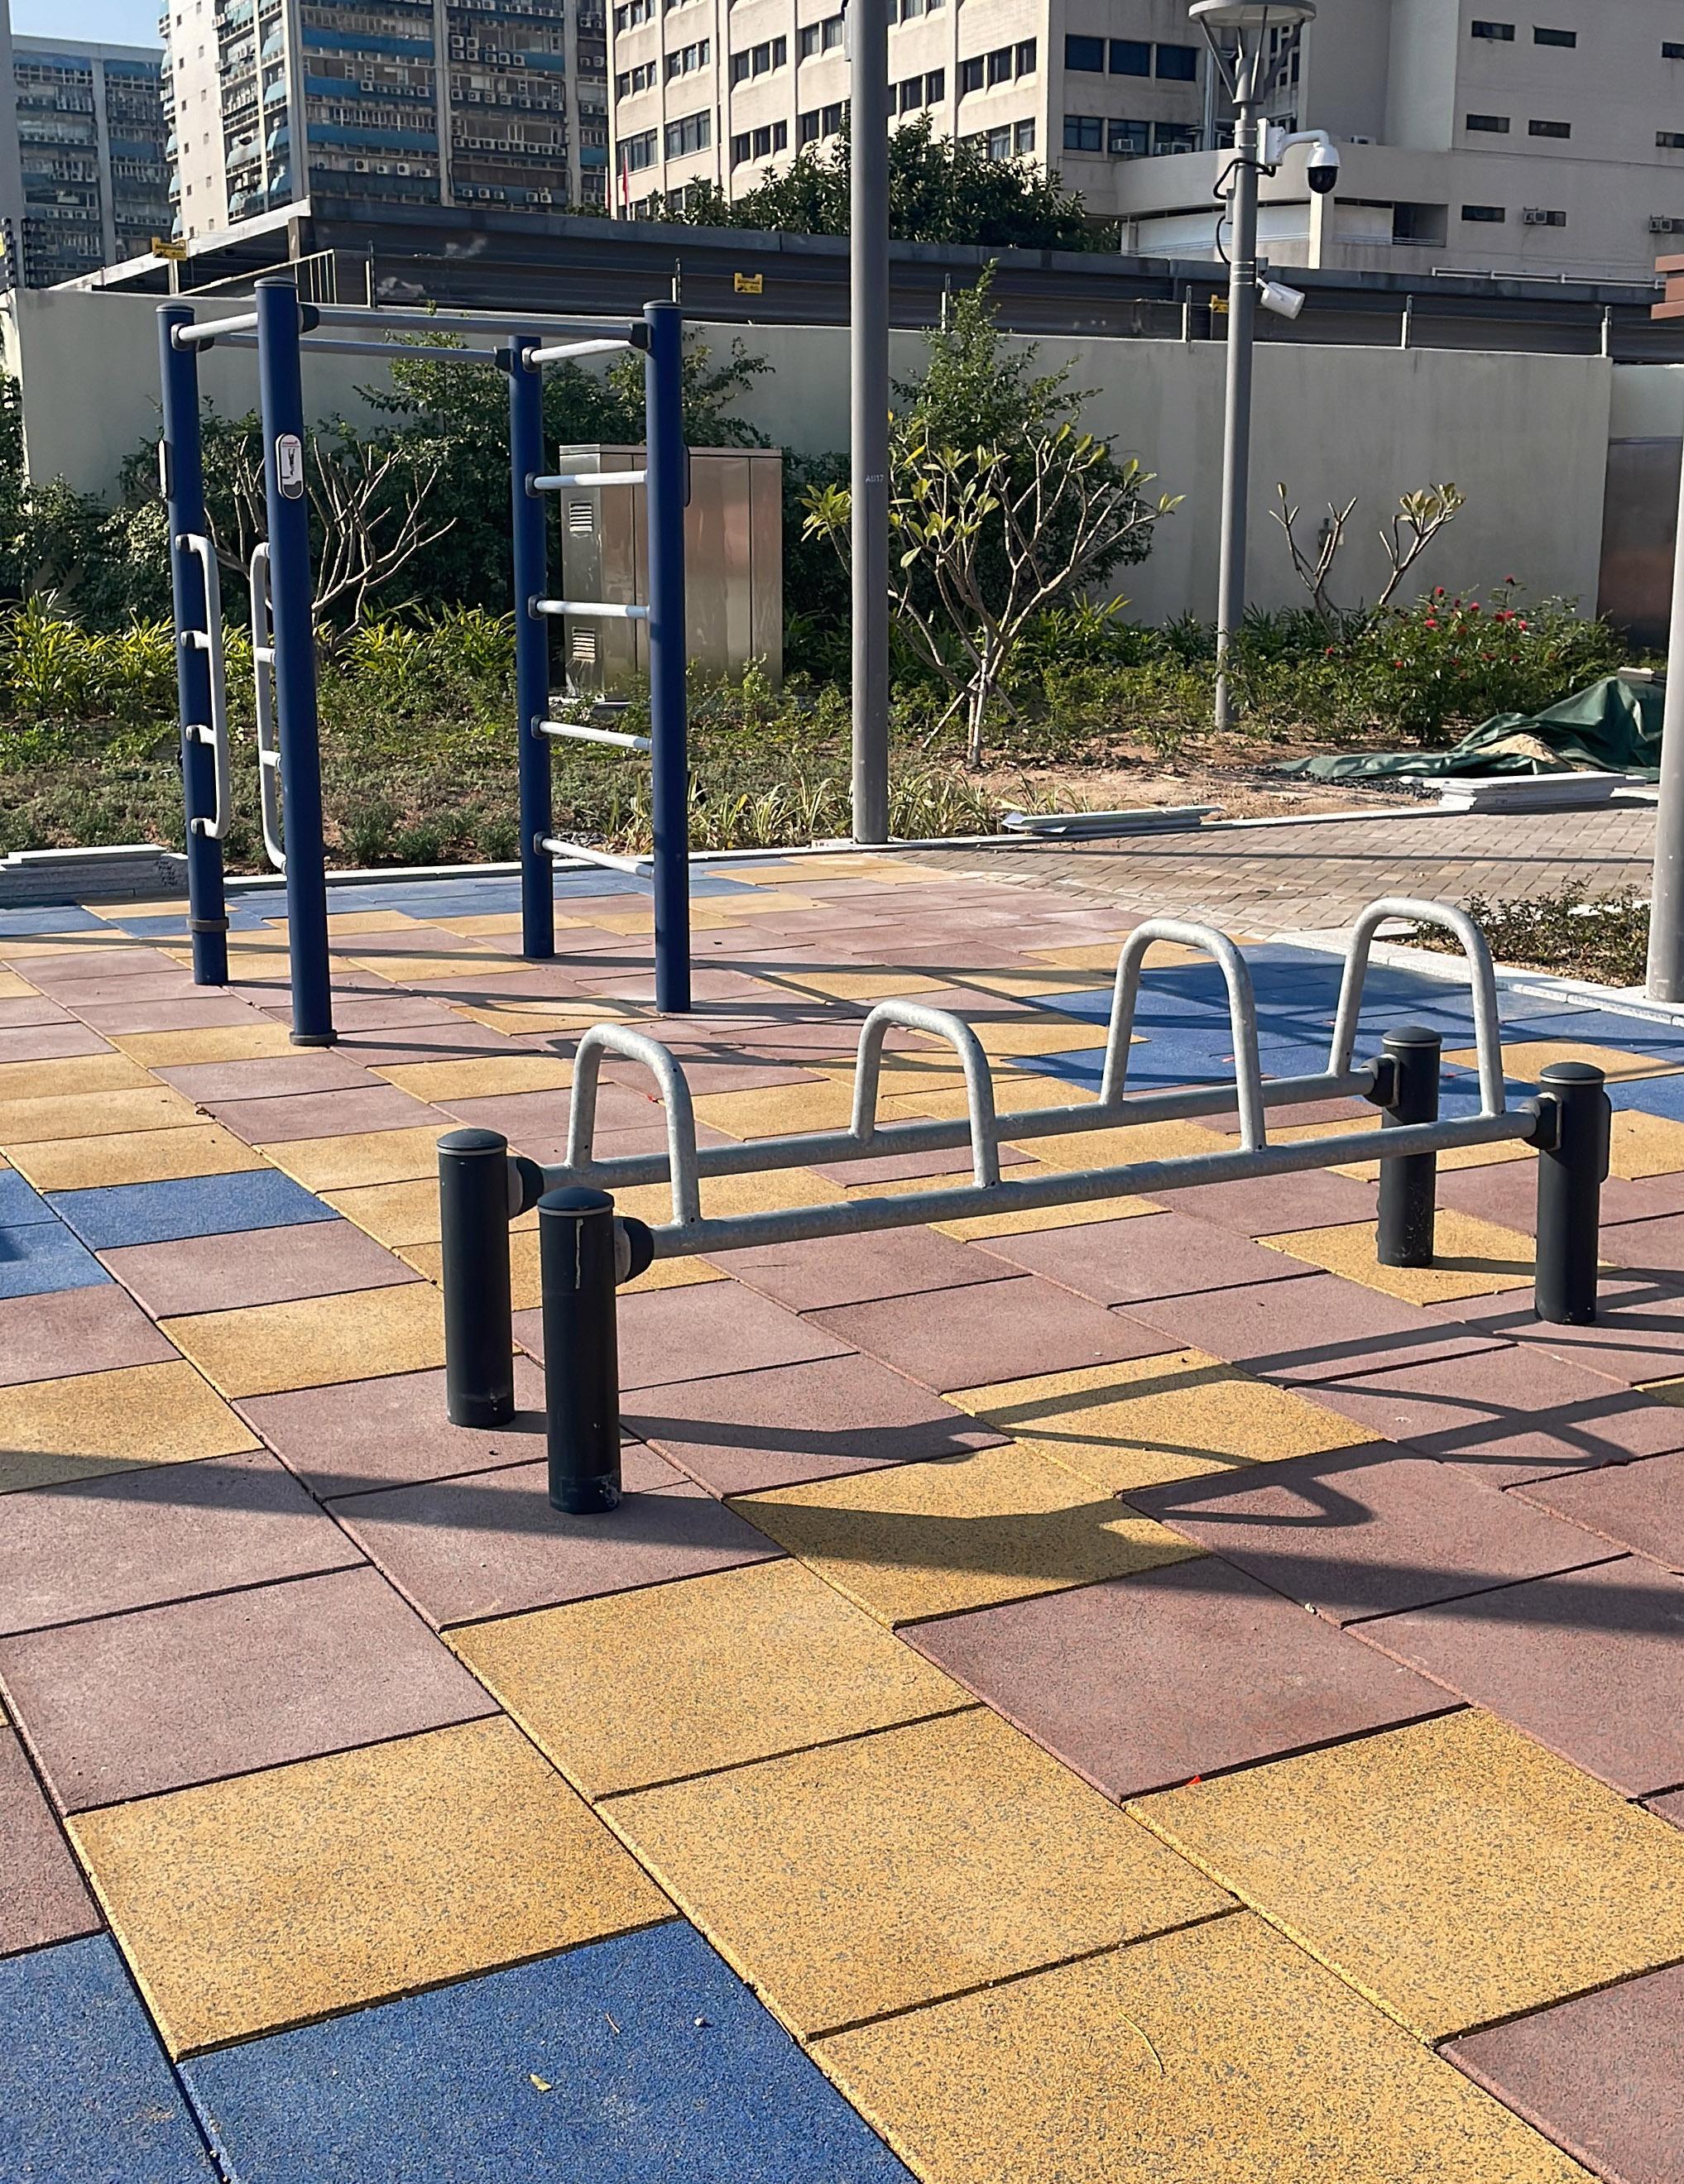 The Hoi Sham Park extension will open for public use from next Monday (April 3), providing a number of recreational facilities to meet the needs of people of all ages. Photo shows the fitness equipment in the park.